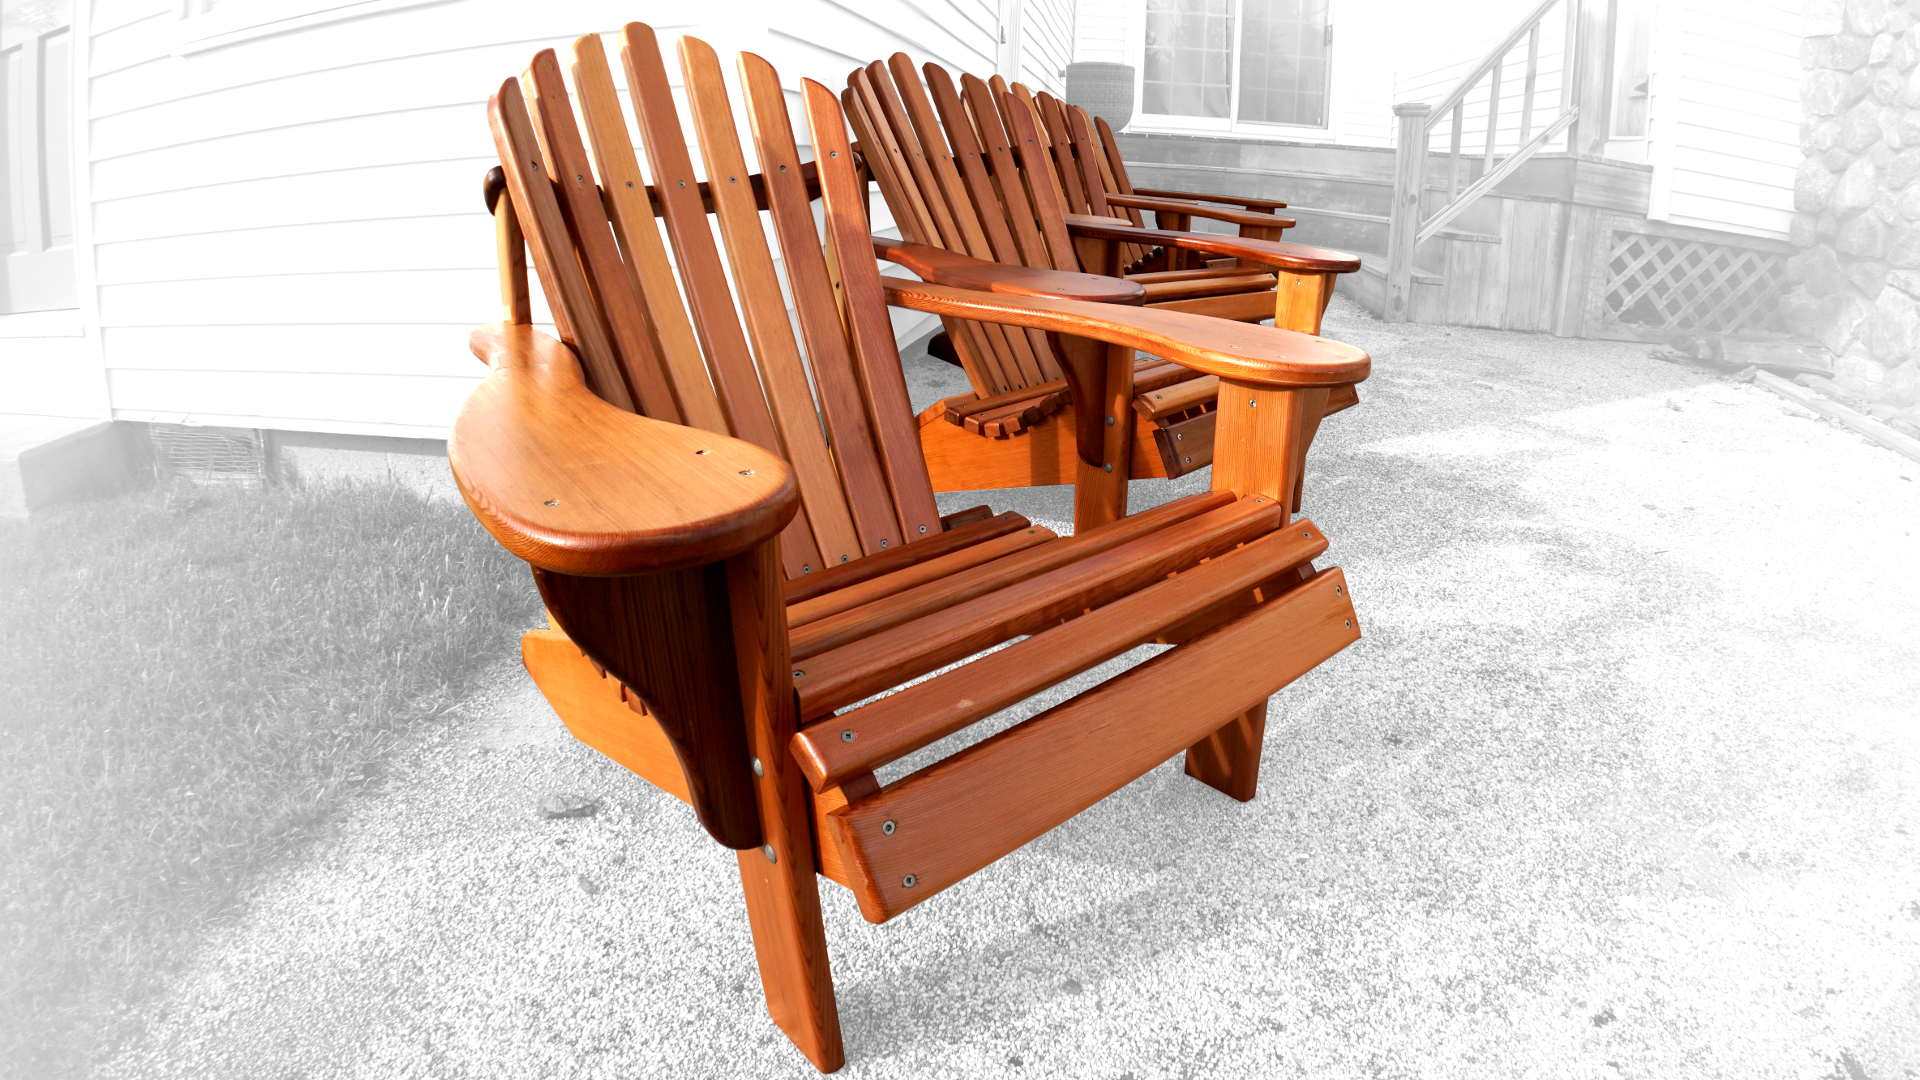 How To Build the Ultimate Adirondack Chair - Jackman Works